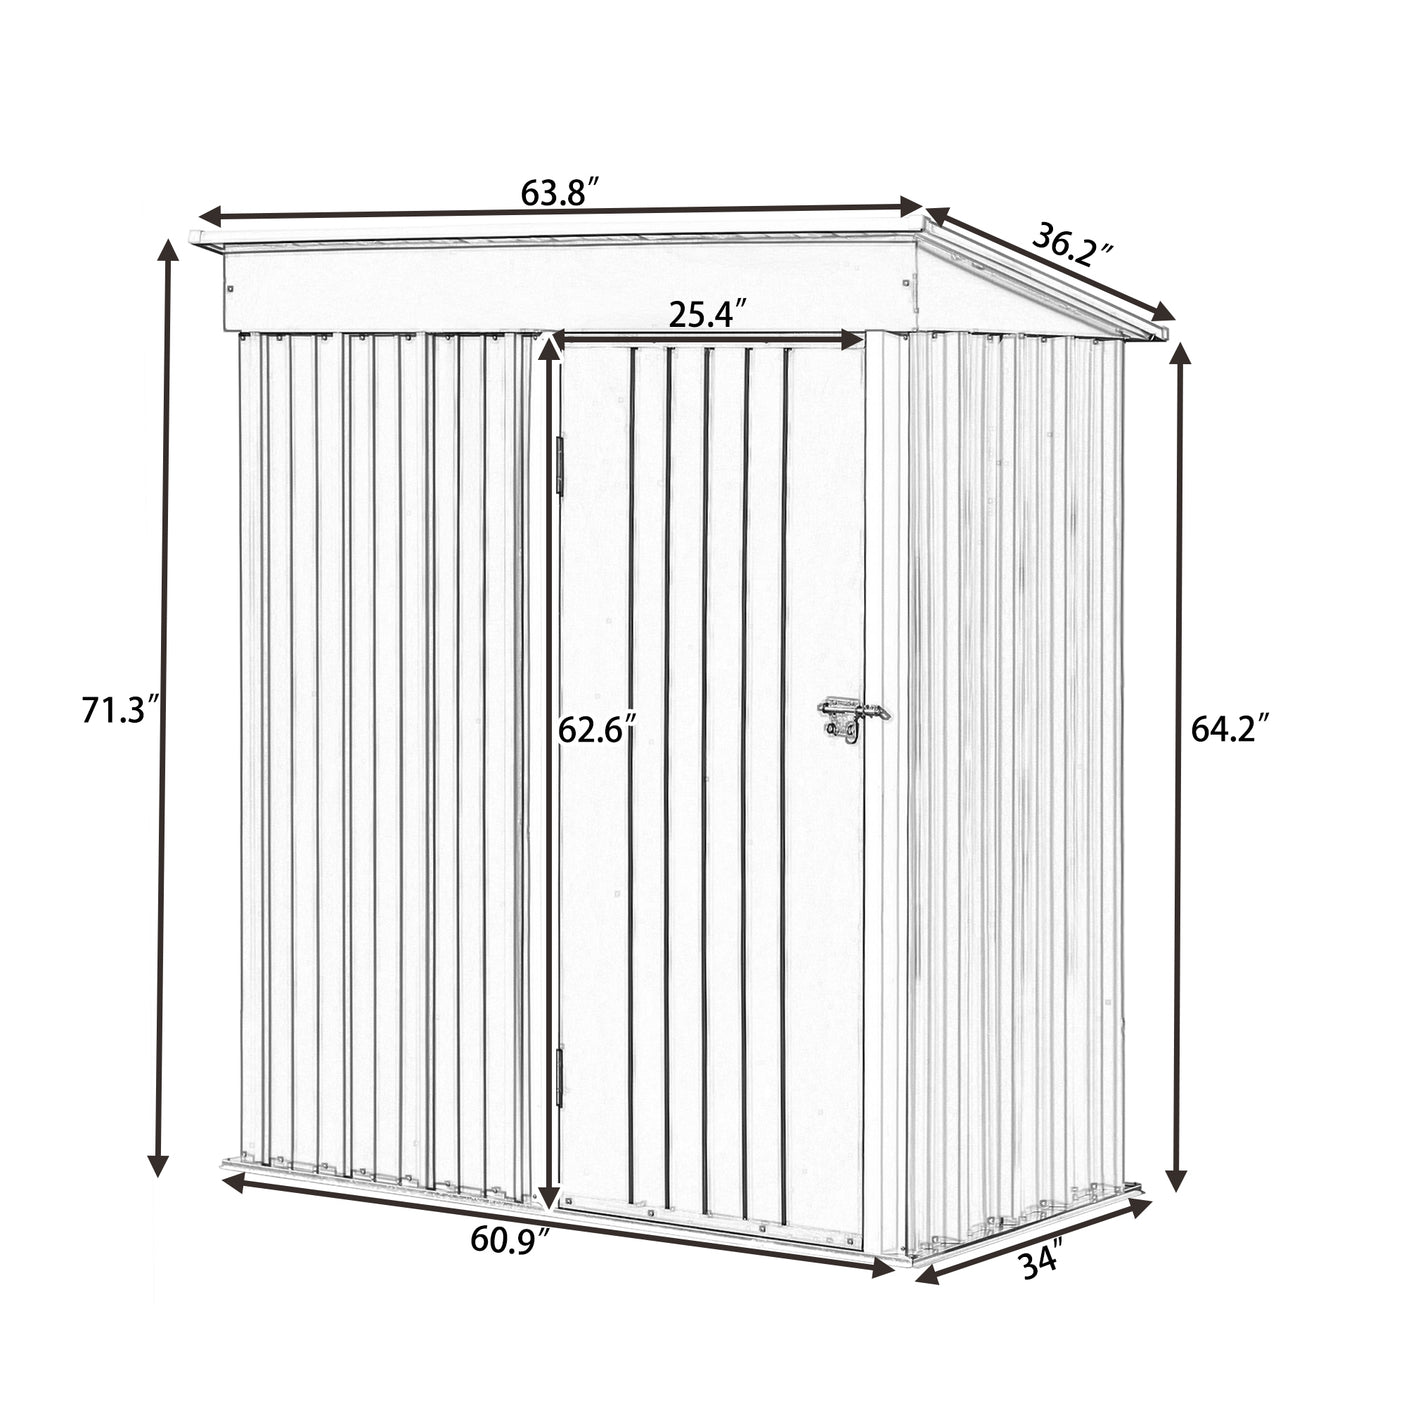 TOPMAX Patio 5ft Wx3ft. L Garden Shed, Metal Lean-to Storage Shed with Lockable Door, Tool Cabinet for Backyard, Lawn, Garden, Gray